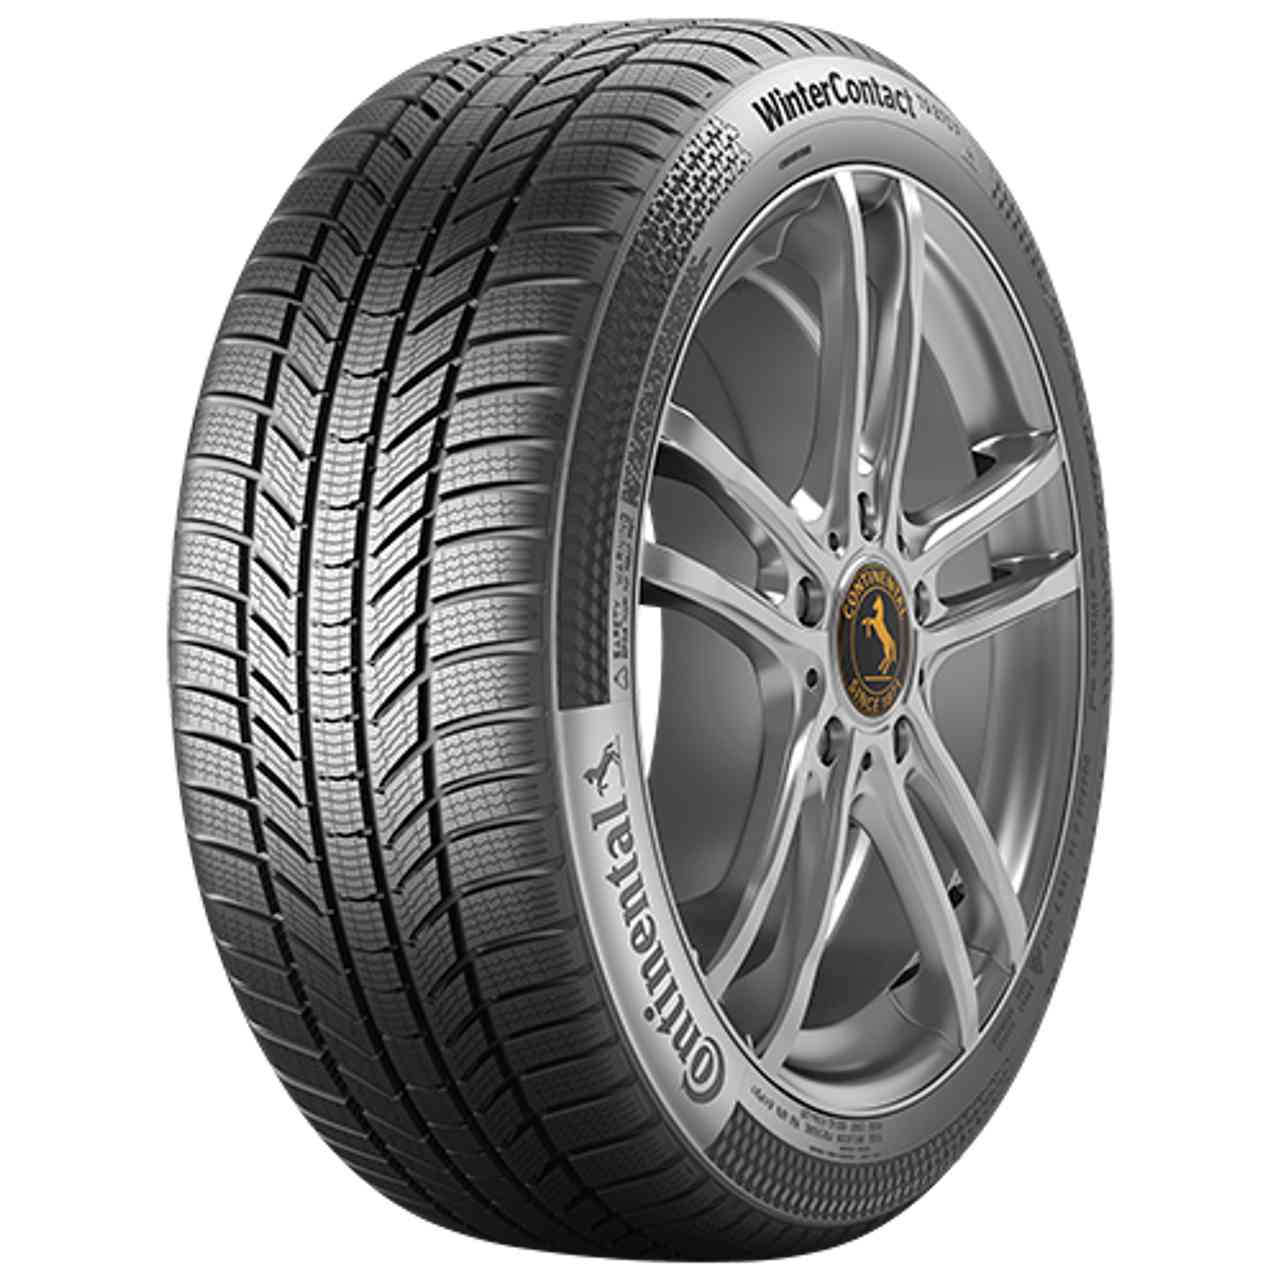 CONTINENTAL WINTERCONTACT TS 870 P (EVc) 235/55R19 105T FR BSW XL